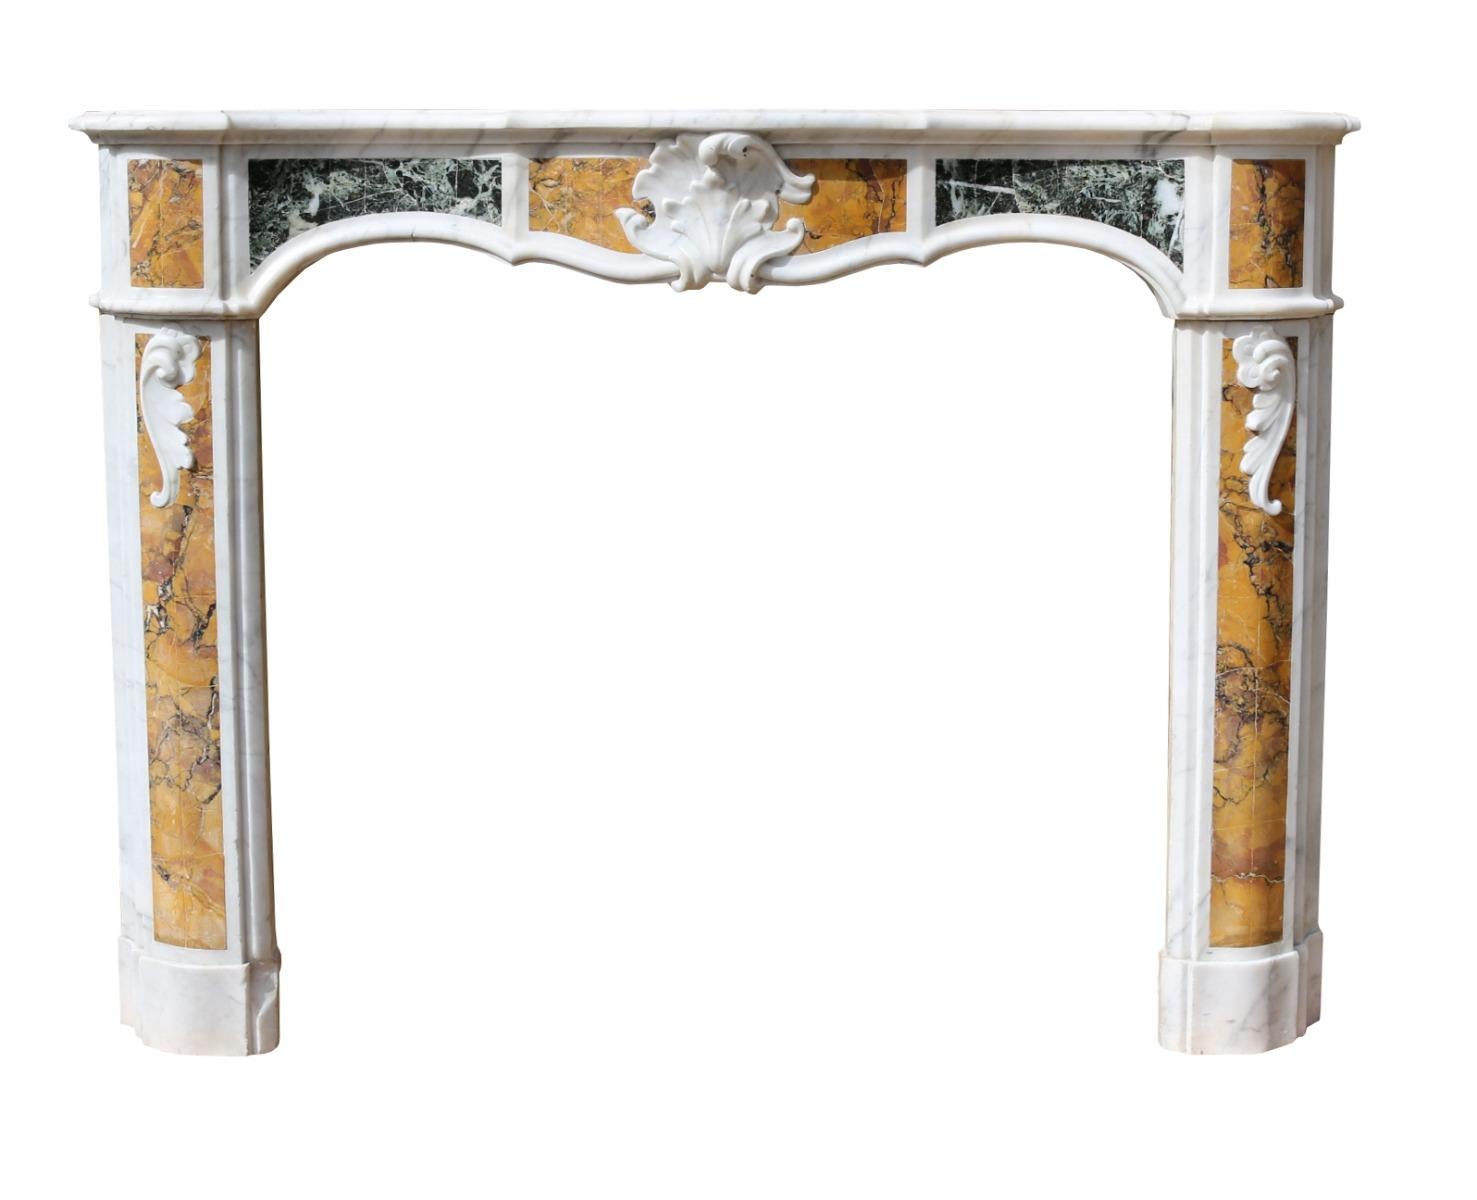 Serpentine frieze with central foliate cartouche and floral scrolls to the jambs. Inlaid specimen marbles of Brocatelle di Sienna and Maurine Green.

Measures: Opening height 94.5 cm

Opening width 106.5 cm

Width between outside of legs 150